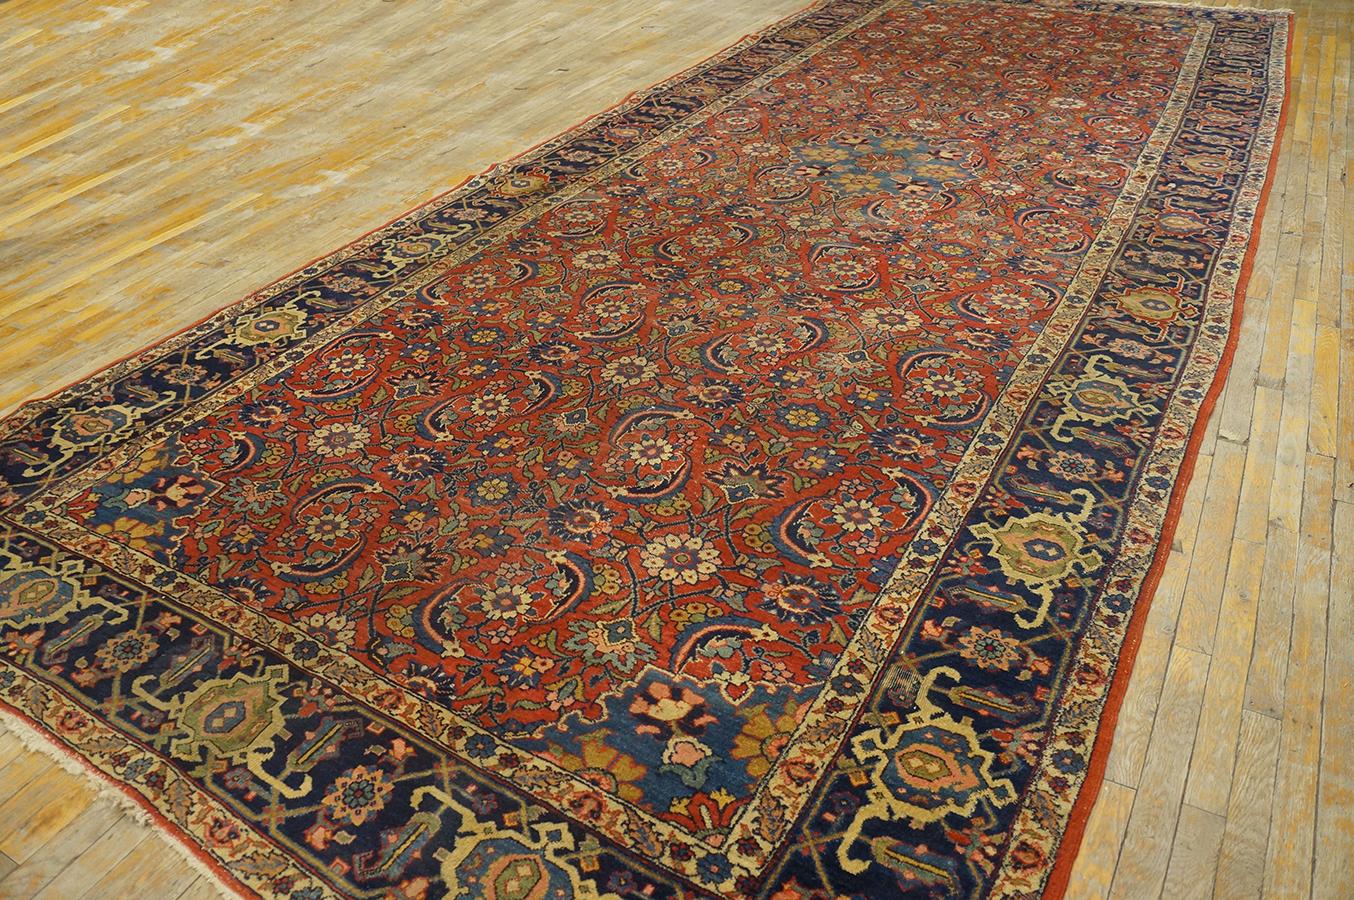 Hand-Knotted 1920s Persian Tabriz Carpet ( 7'4